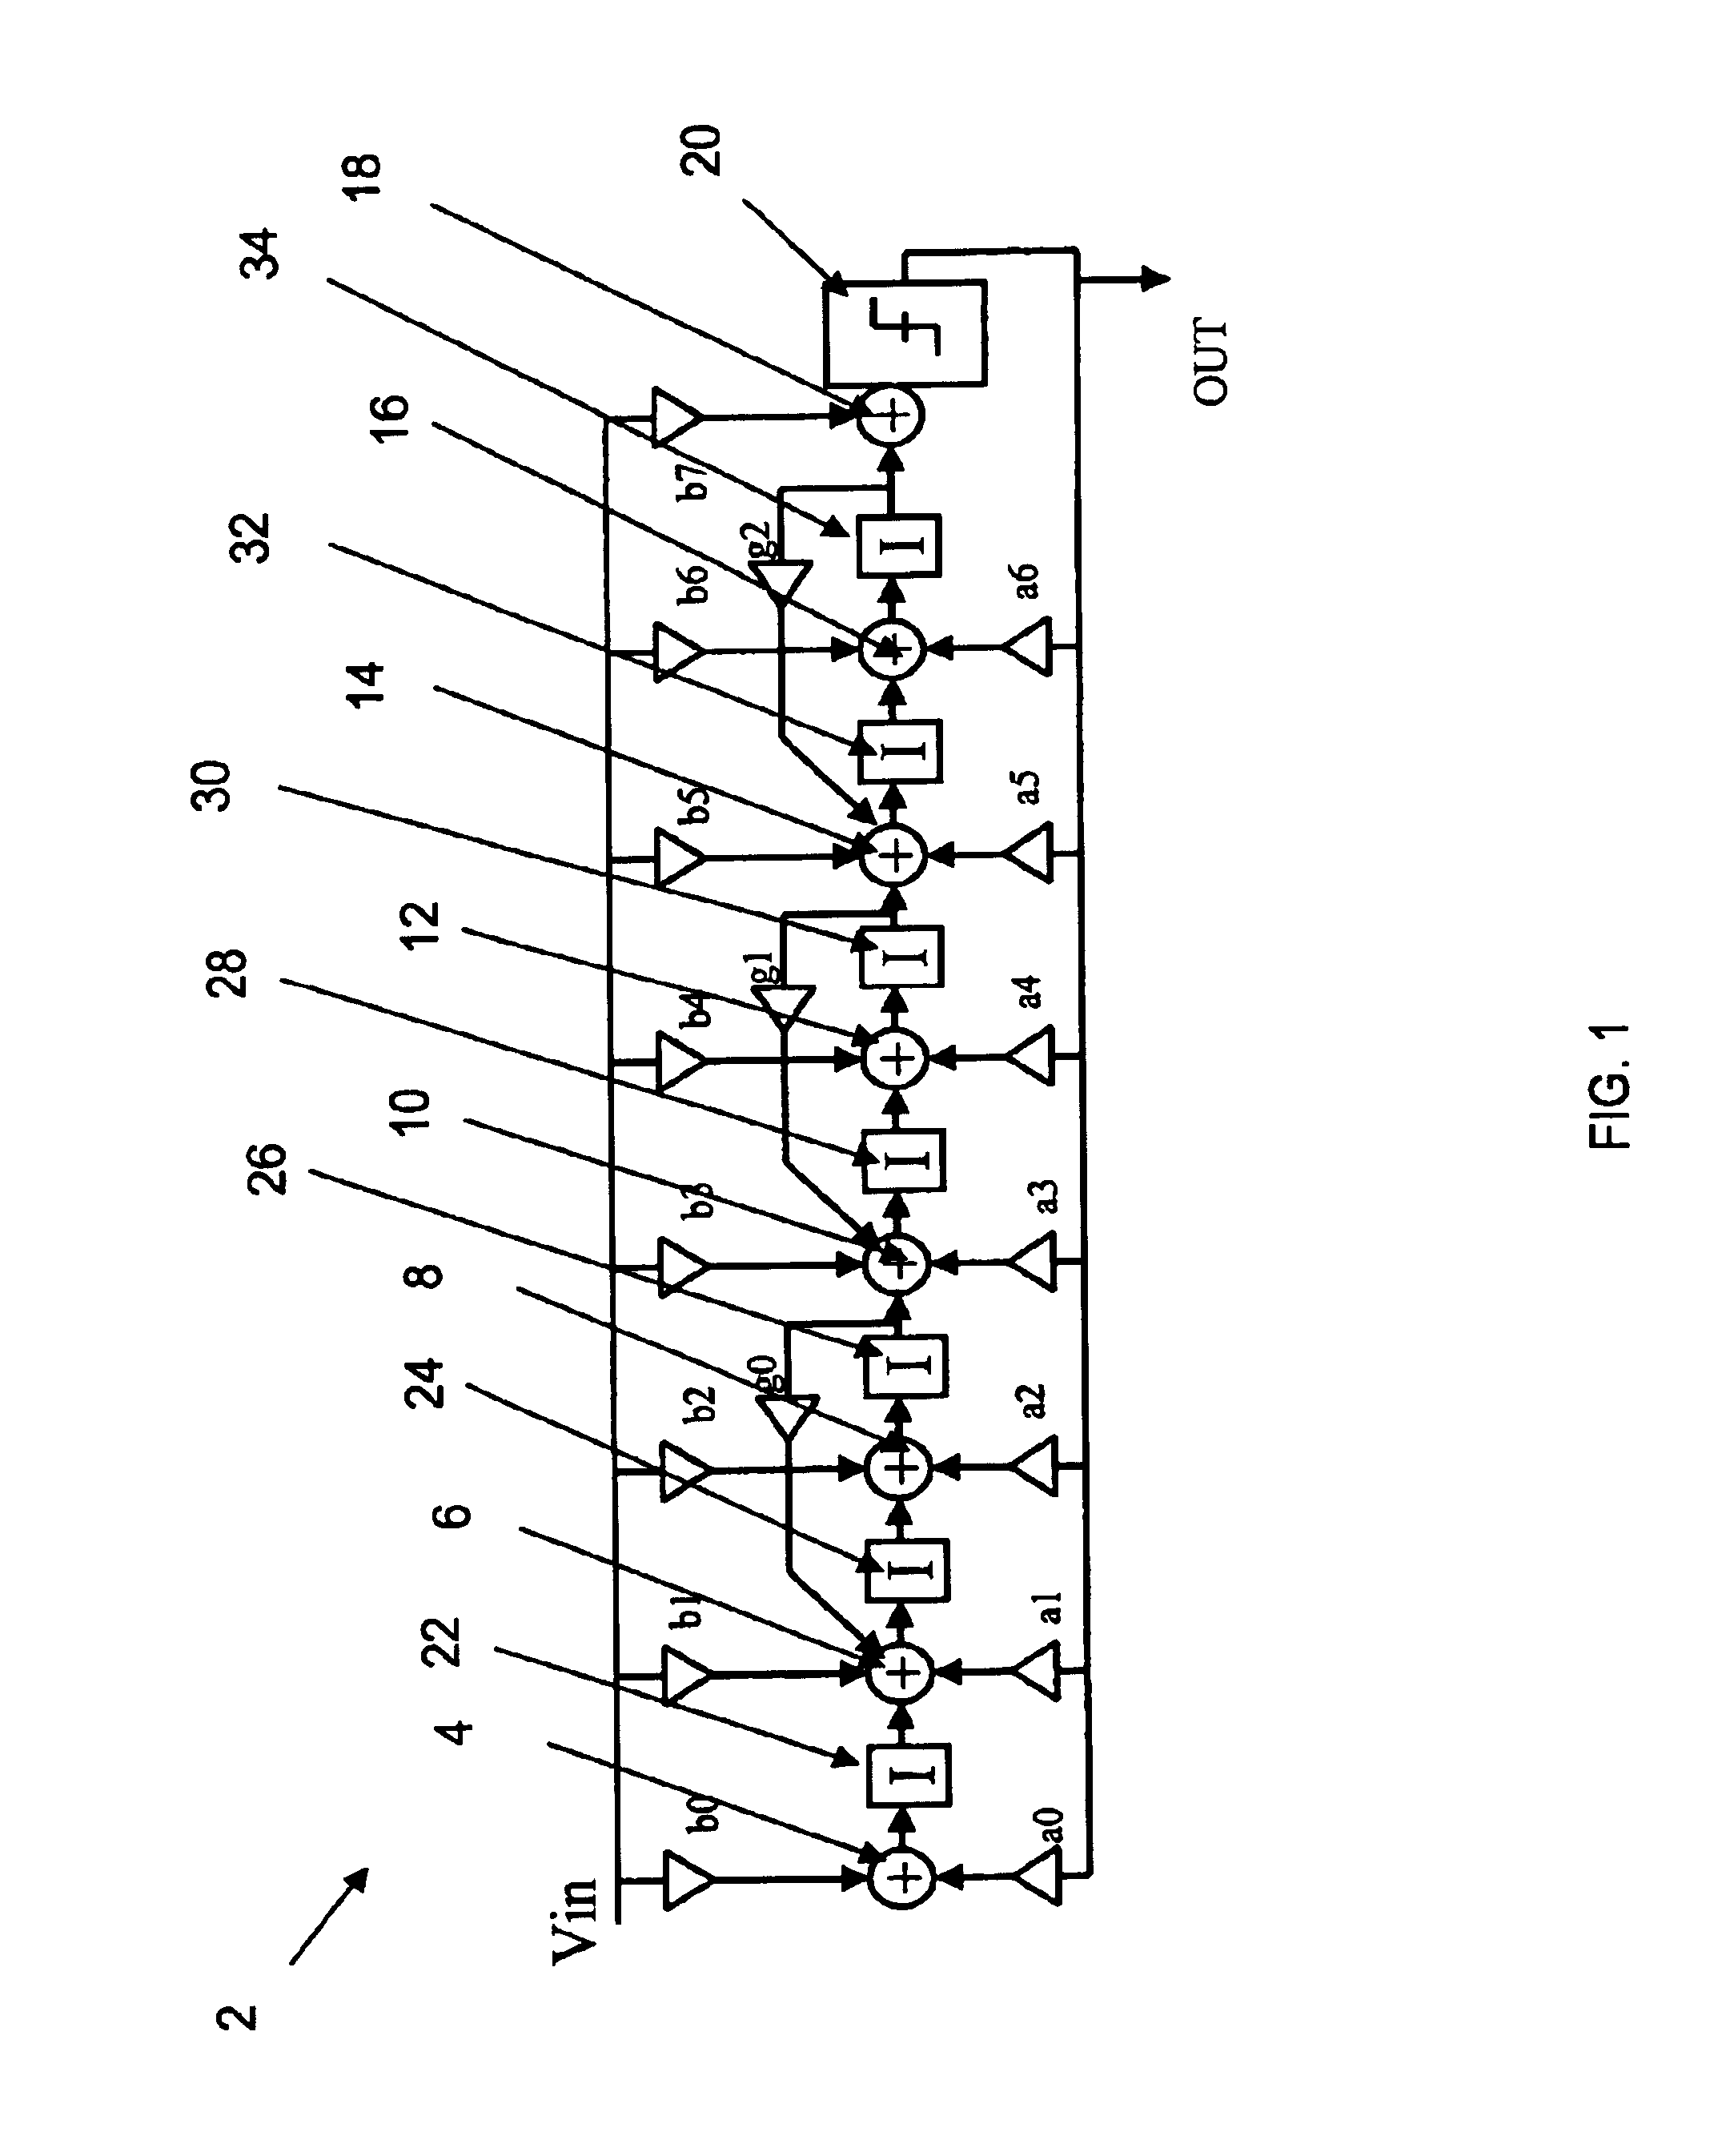 Sigma-delta modulator with reduced switching rate for use in class-D amplification